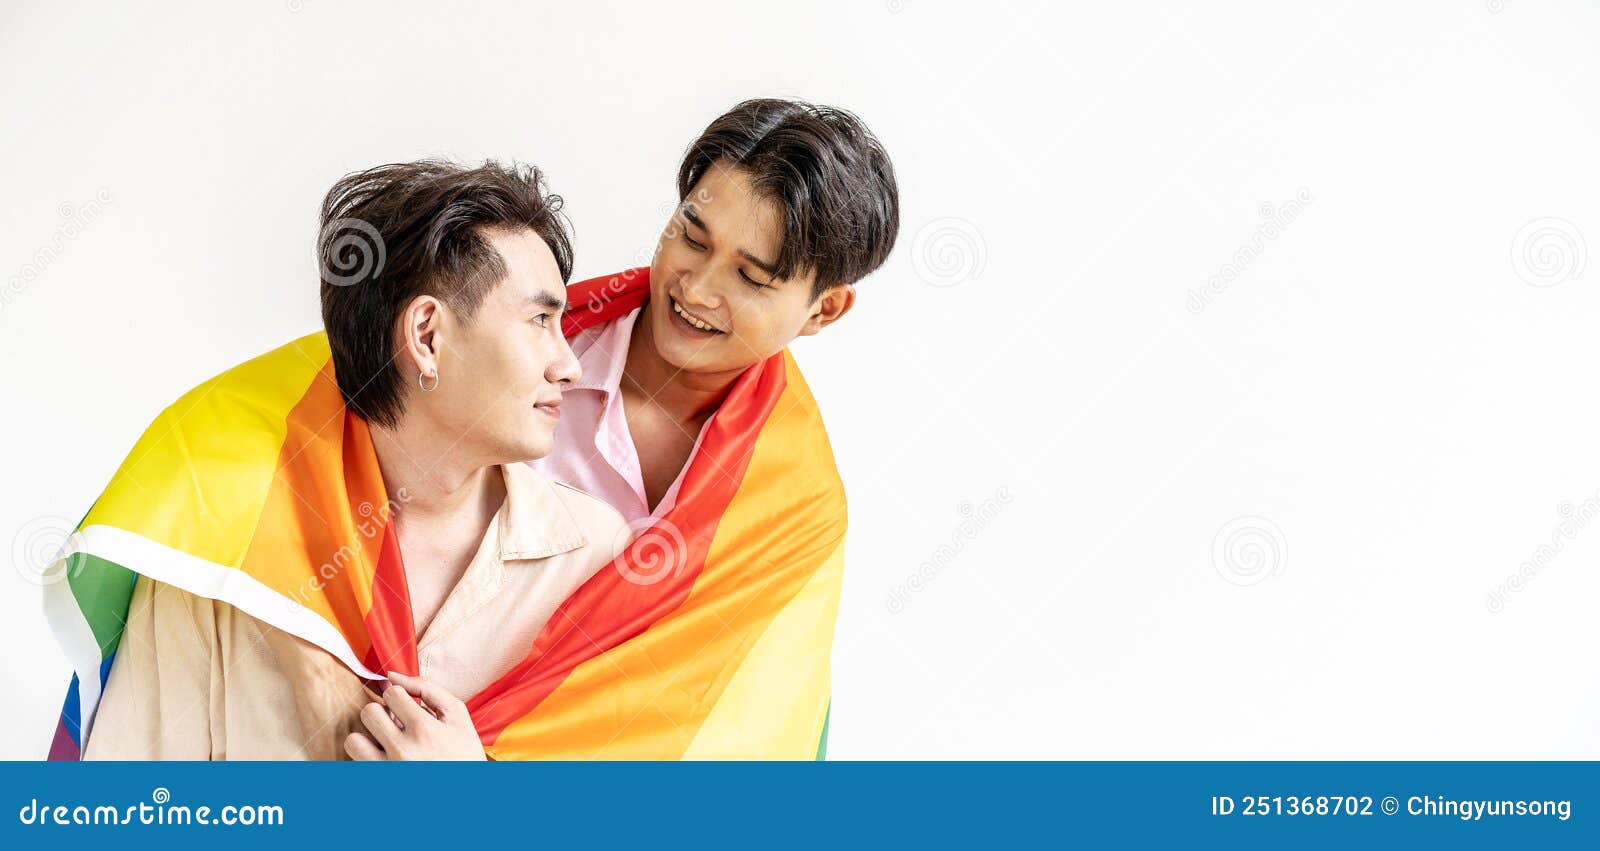 Guys Spend Time Together At Home Portrait Of Happy Asian Gay Couple Embracing And Showing Their 